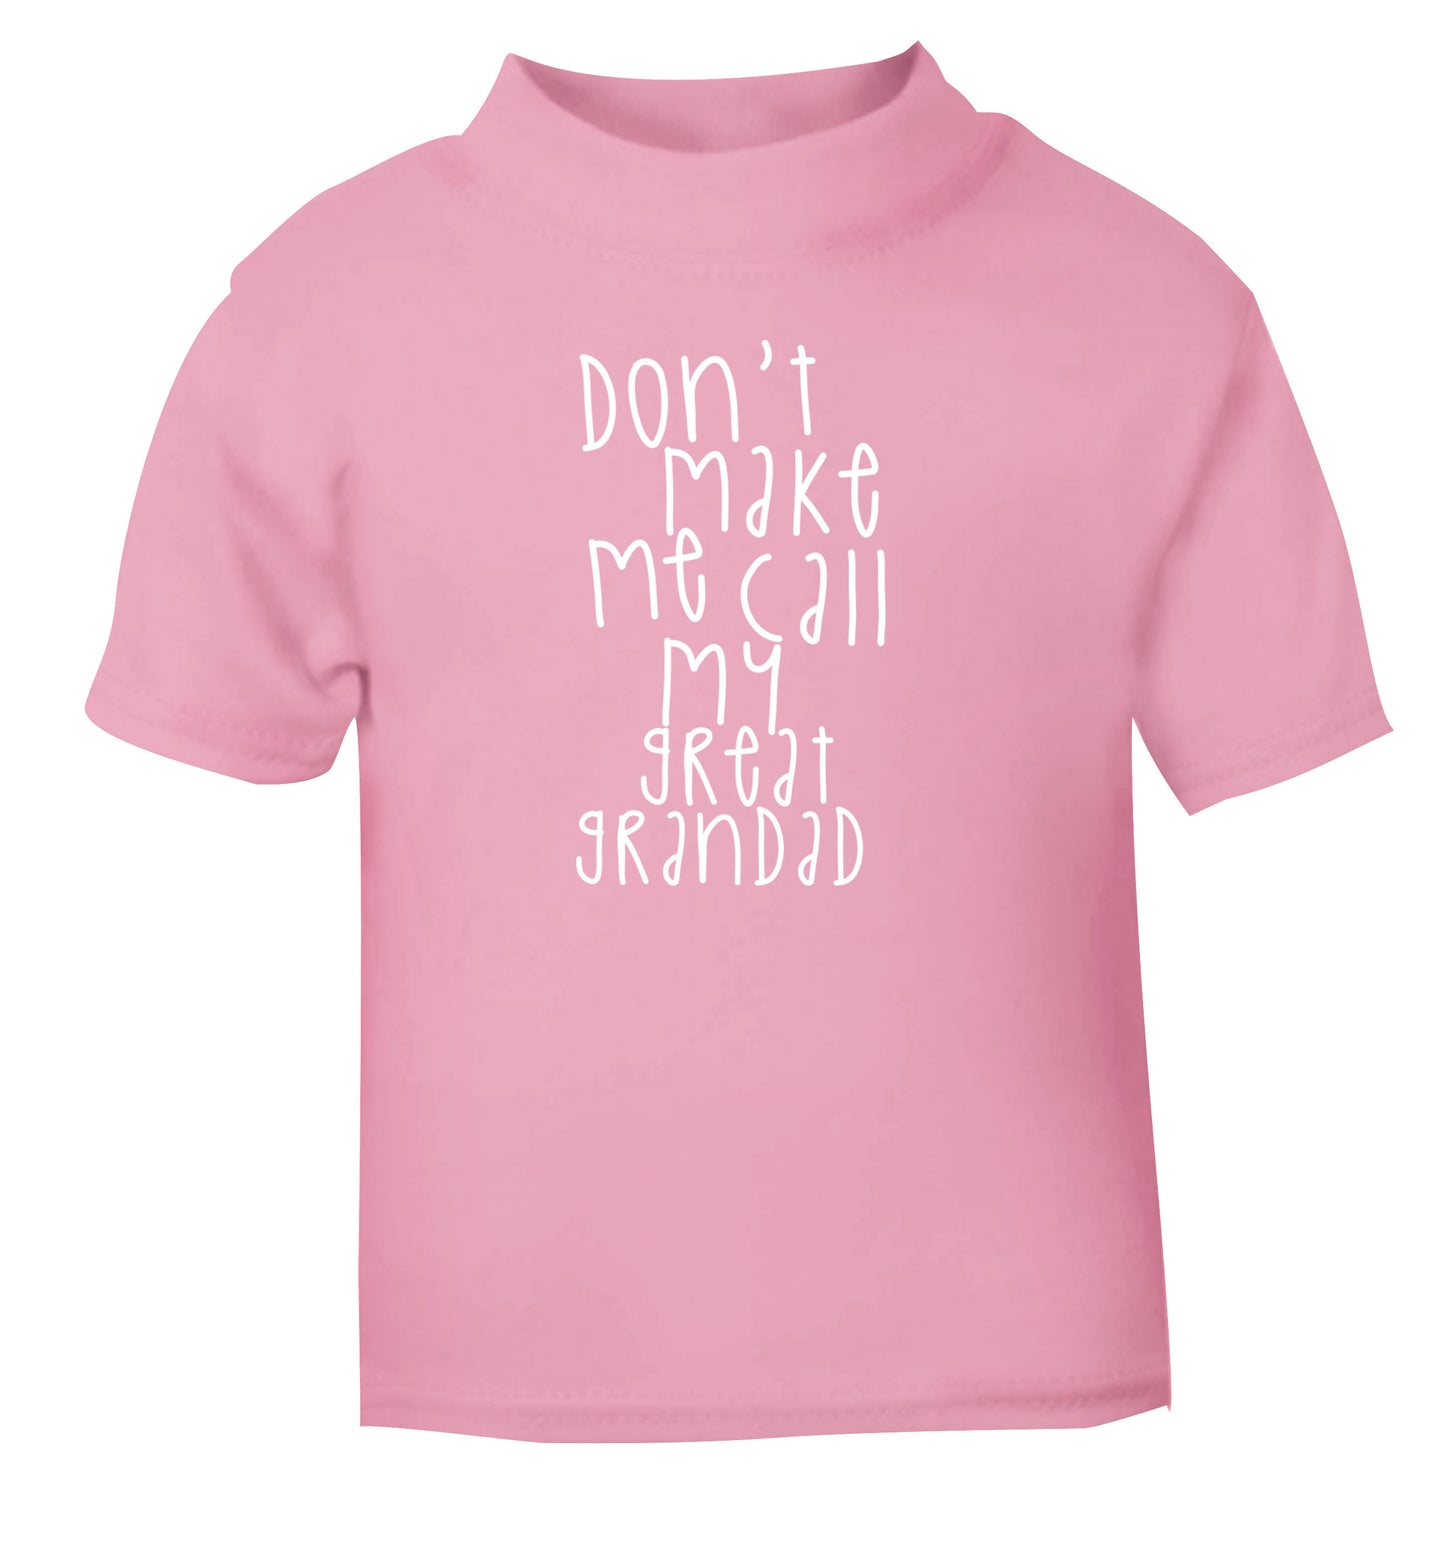 Don't make me call my great grandad light pink Baby Toddler Tshirt 2 Years